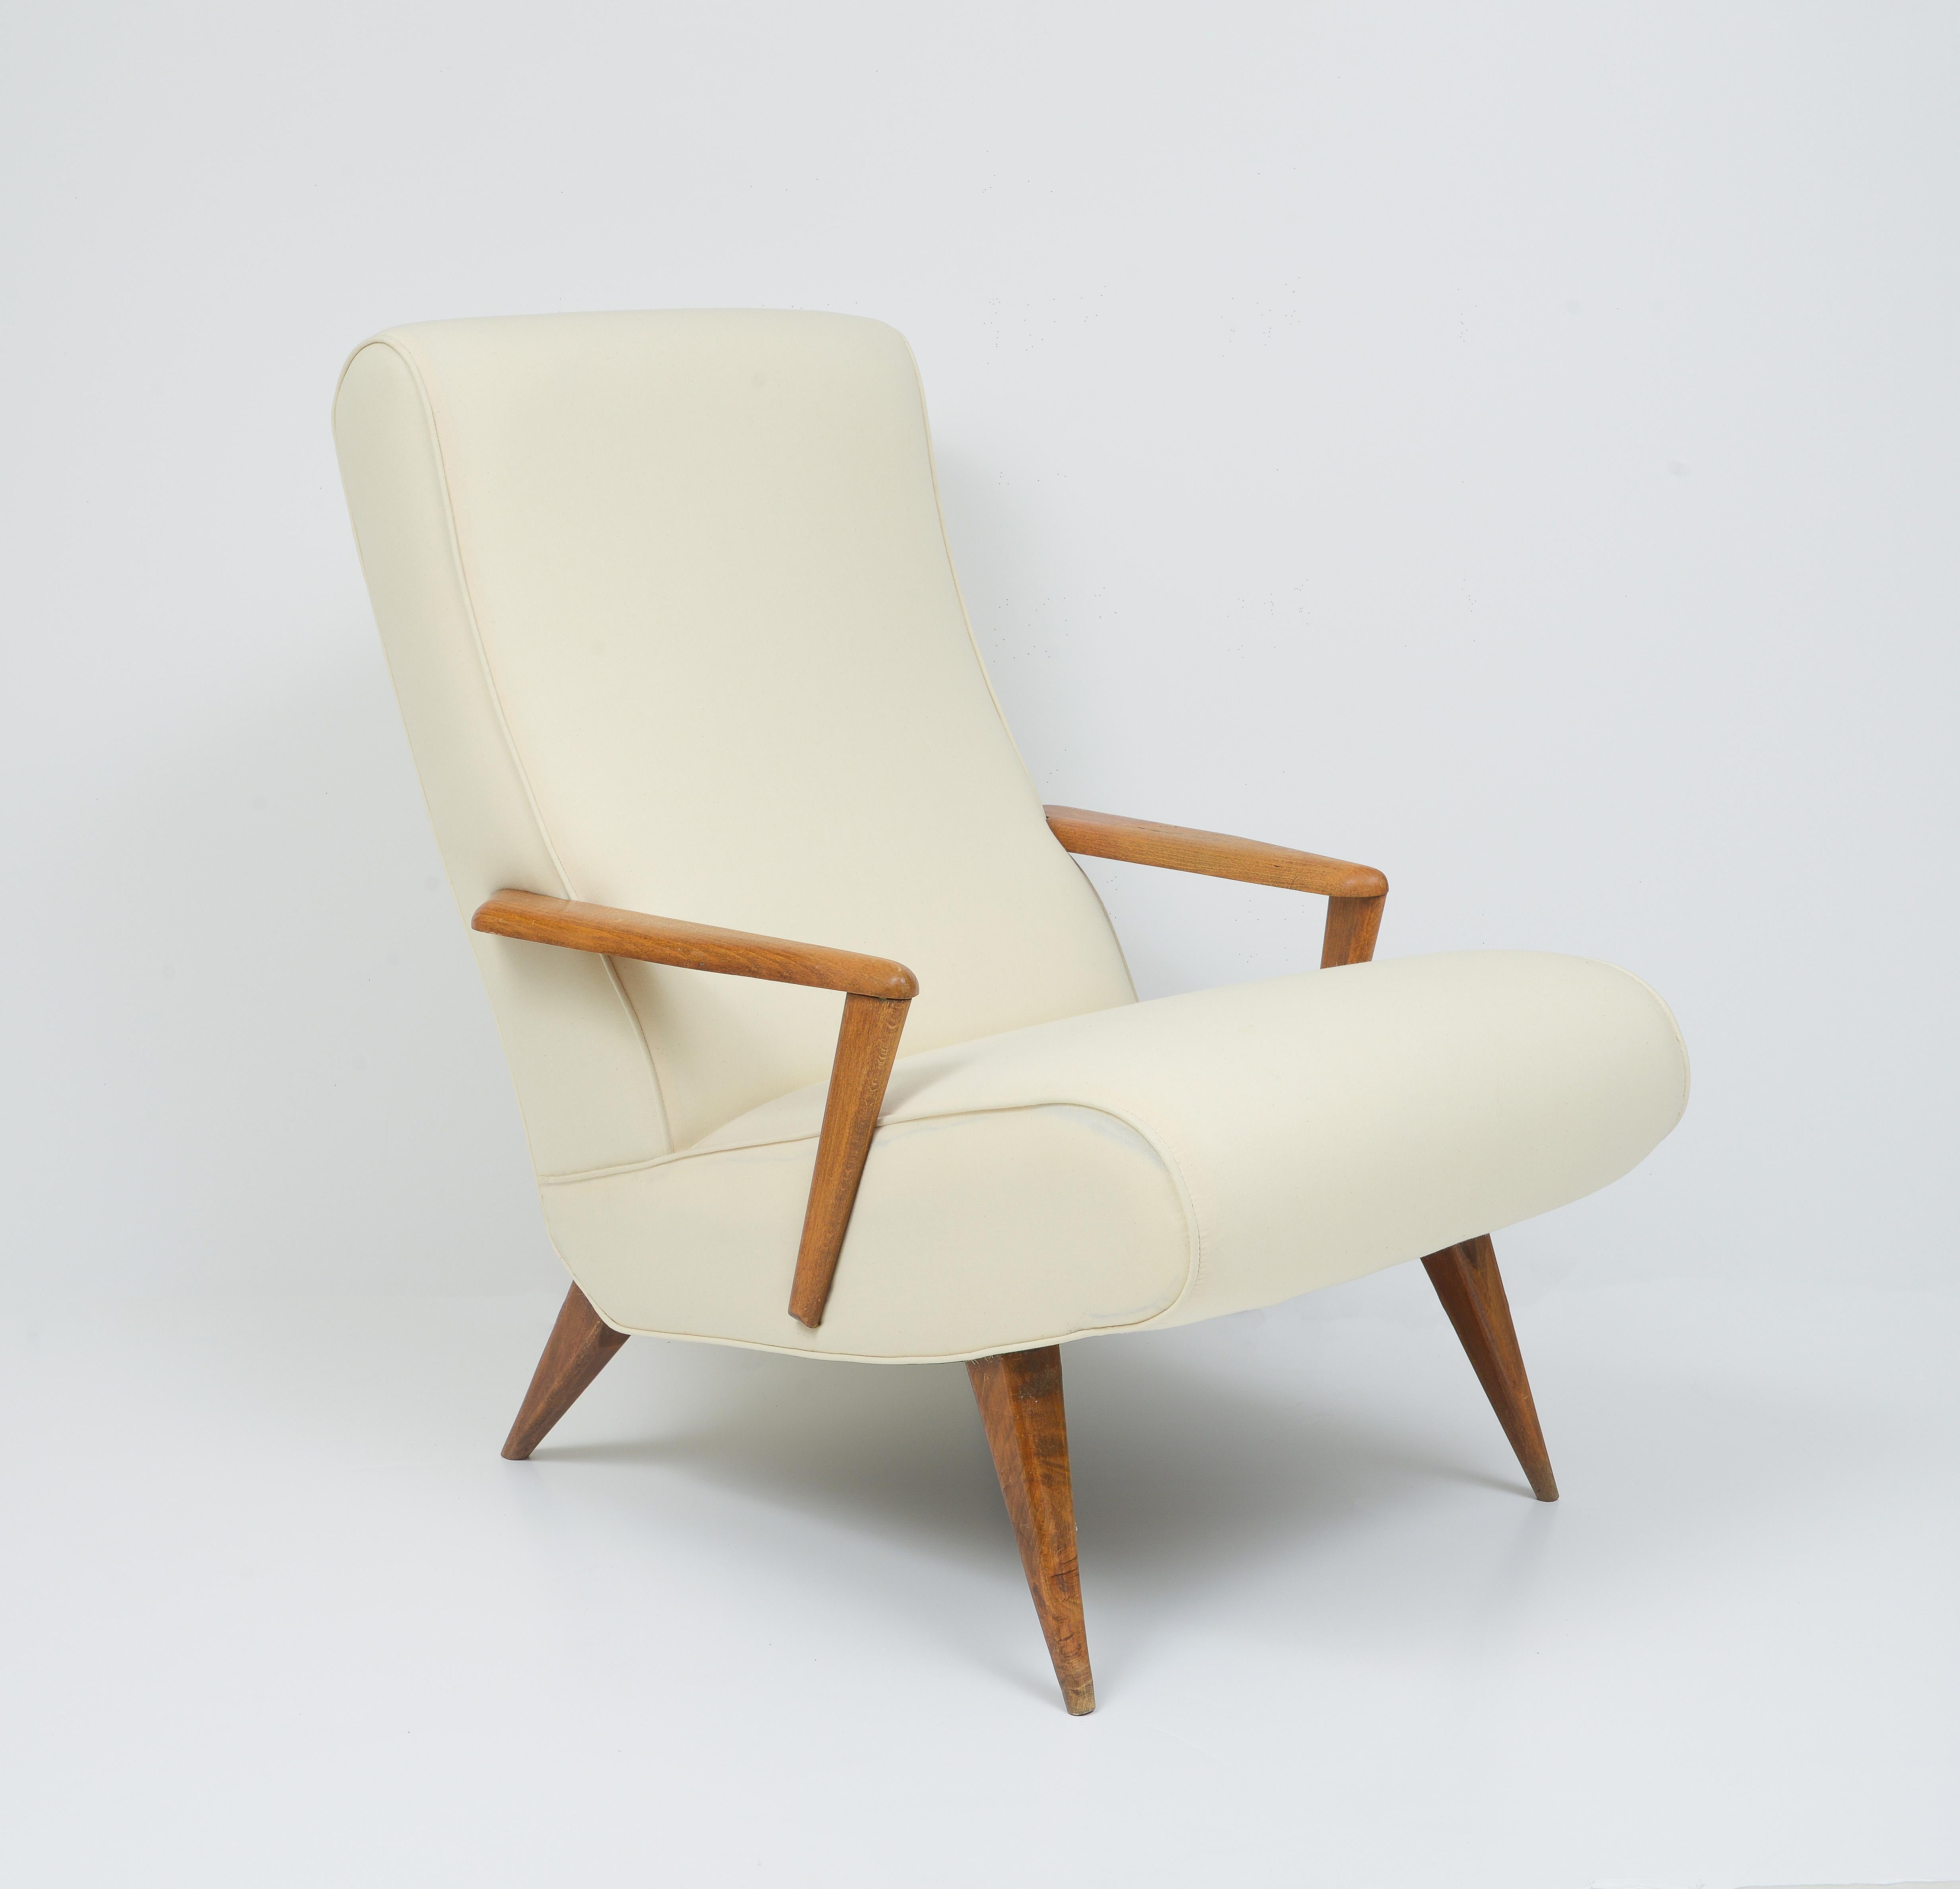 20th Century Sculptural Pair Italian White Wood Elegant Lounge Chairs, 1960's, Italy For Sale